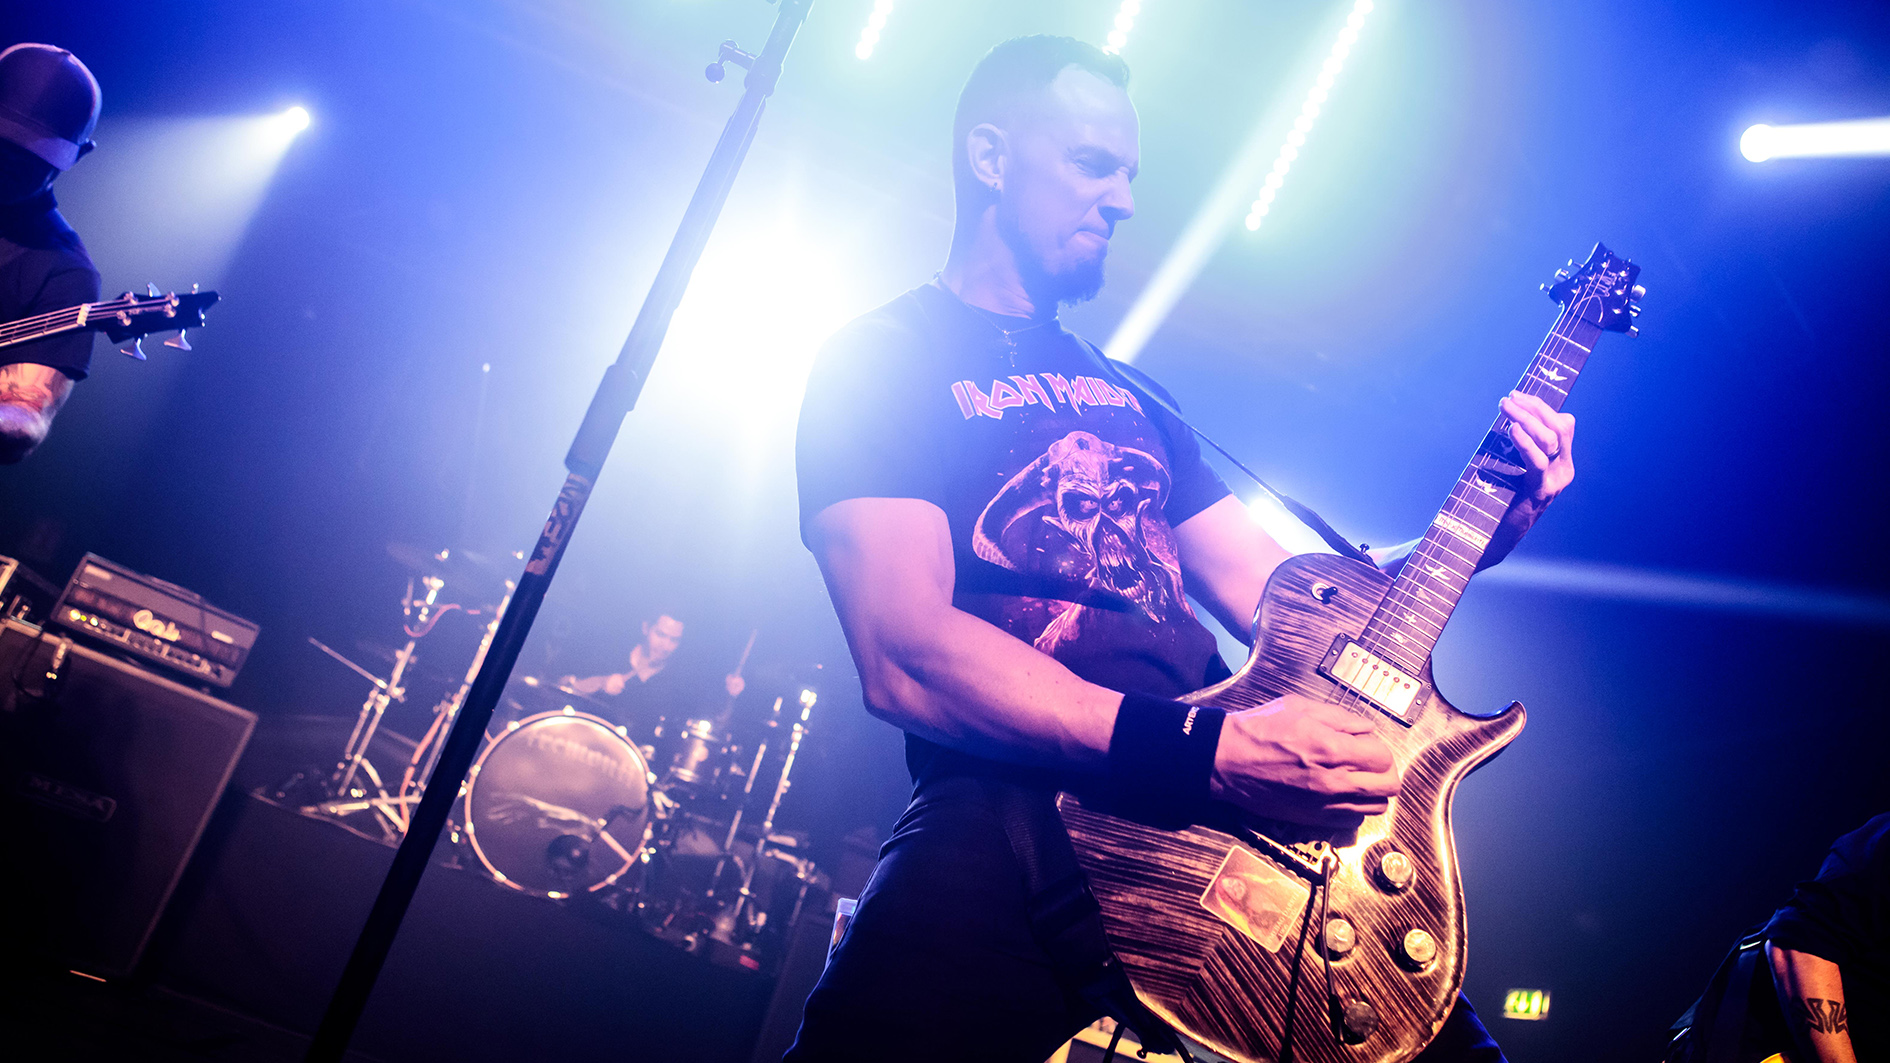 Tremonti announce new album Marching in Time, promise “thrashinduced